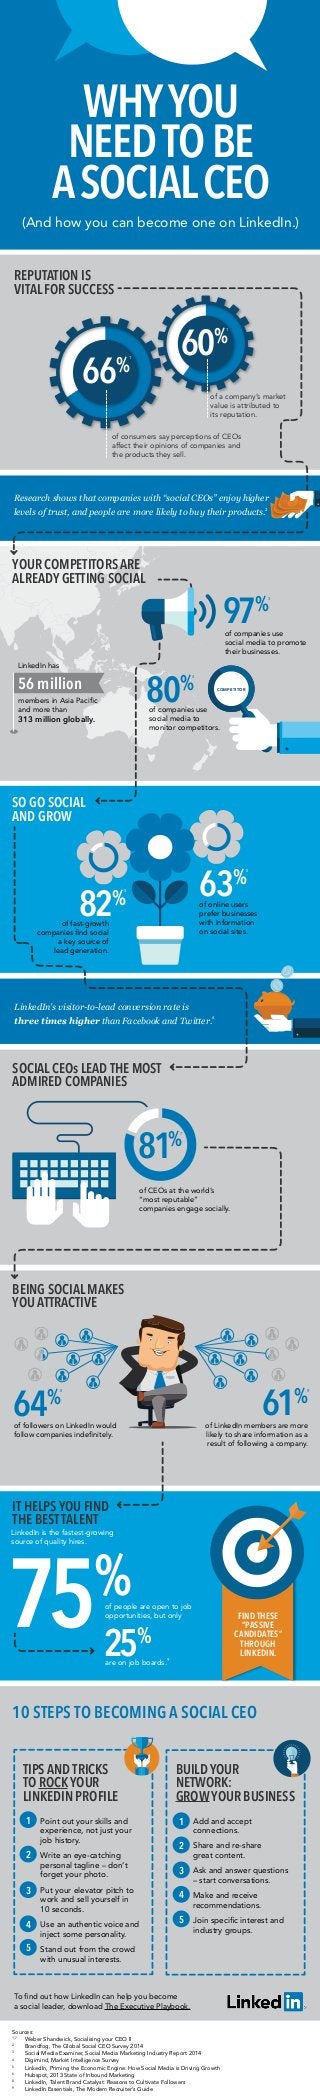 WHY YOU 
NEED TO BE 
A SOCIAL CEO 
(And how you can become one on LinkedIn.) 
REPUTATION IS 
VITAL FOR SUCCESS 
60% 
66% 
of consumers say perceptions of CEOs 
affect their opinions of companies and 
the products they sell. 
Research shows that companies with “social CEOs” enjoy higher 
levels of trust, and people are more likely to buy their products.2 
YOUR COMPETITORS ARE 
ALREADY GETTING SOCIAL 
80% 
COMPETITOR 
63% 
LinkedIn has 
56 million 
members in Asia Pacific 
and more than 
313 million globally. 
82% of online users 
prefer businesses 
with information 
on social sites. 
LinkedIn’s visitor-to-lead conversion rate is 
three times higher than Facebook and Twitter.6 
SOCIAL CEOs LEAD THE MOST 
ADMIRED COMPANIES 
BEING SOCIAL MAKES 
YOU ATTRACTIVE 
of followers on LinkedIn would 
follow companies indefinitely. 
of a company’s market 
value is attributed to 
its reputation. 
81% 
of CEOs at the world’s 
“most reputable” 
companies engage socially. 
of LinkedIn members are more 
likely to share information as a 
result of following a company. 
of fast-growth 
companies find social 
a key source of 
lead generation. 
IT HELPS YOU FIND 
THE BEST TALENT 
LinkedIn is the fastest-growing 
source of quality hires. 
TIPS AND TRICKS 
TO ROCK YOUR 
LINKEDIN PROFILE 
To find out how LinkedIn can help you become 
a social leader, download The Executive Playbook. 
Sources: 
1,7 Weber Shandwick, Socialising your CEO II 
2 Brandfog, The Global Social CEO Survey 2014 
3 Social Media Examiner, Social Media Marketing Industry Report 2014 
4 Digimind, Market Intelligence Survey 
5 LinkedIn, Priming the Economic Engine: How Social Media is Driving Growth 
6 Hubspot, 2013 State of Inbound Marketing 
8 LinkedIn, Talent Brand Catalyst: Reasons to Cultivate Followers 
9 LinkedIn Essentials, The Modern Recruiter’s Guide 
of companies use 
social media to promote 
their businesses. 
of companies use 
social media to 
monitor competitors. 
SO GO SOCIAL 
AND GROW 
of people are open to job 
opportunities, but only 
97% 
64% 61% 
75% 
25% 
are on job boards.9 
FIND THESE 
“PASSIVE 
CANDIDATES” 
THROUGH 
LINKEDIN. 
10 STEPS TO BECOMING A SOCIAL CEO 
Add and accept 
connections. 
Share and re-share 
great content. 
Ask and answer questions 
– start conversations. 
Make and receive 
recommendations. 
Join specific interest and 
industry groups. 
Point out your skills and 
experience, not just your 
job history. 
Write an eye-catching 
personal tagline – don’t 
forget your photo. 
Put your elevator pitch to 
work and sell yourself in 
10 seconds. 
Use an authentic voice and 
inject some personality. 
Stand out from the crowd 
with unusual interests. 
BUILD YOUR 
NETWORK: 
GROW YOUR BUSINESS 
1 1 
2 
2 
3 
3 
4 
4 
5 
5 
1 
1 
3 
4 
5 
5 
7 
8 8 
